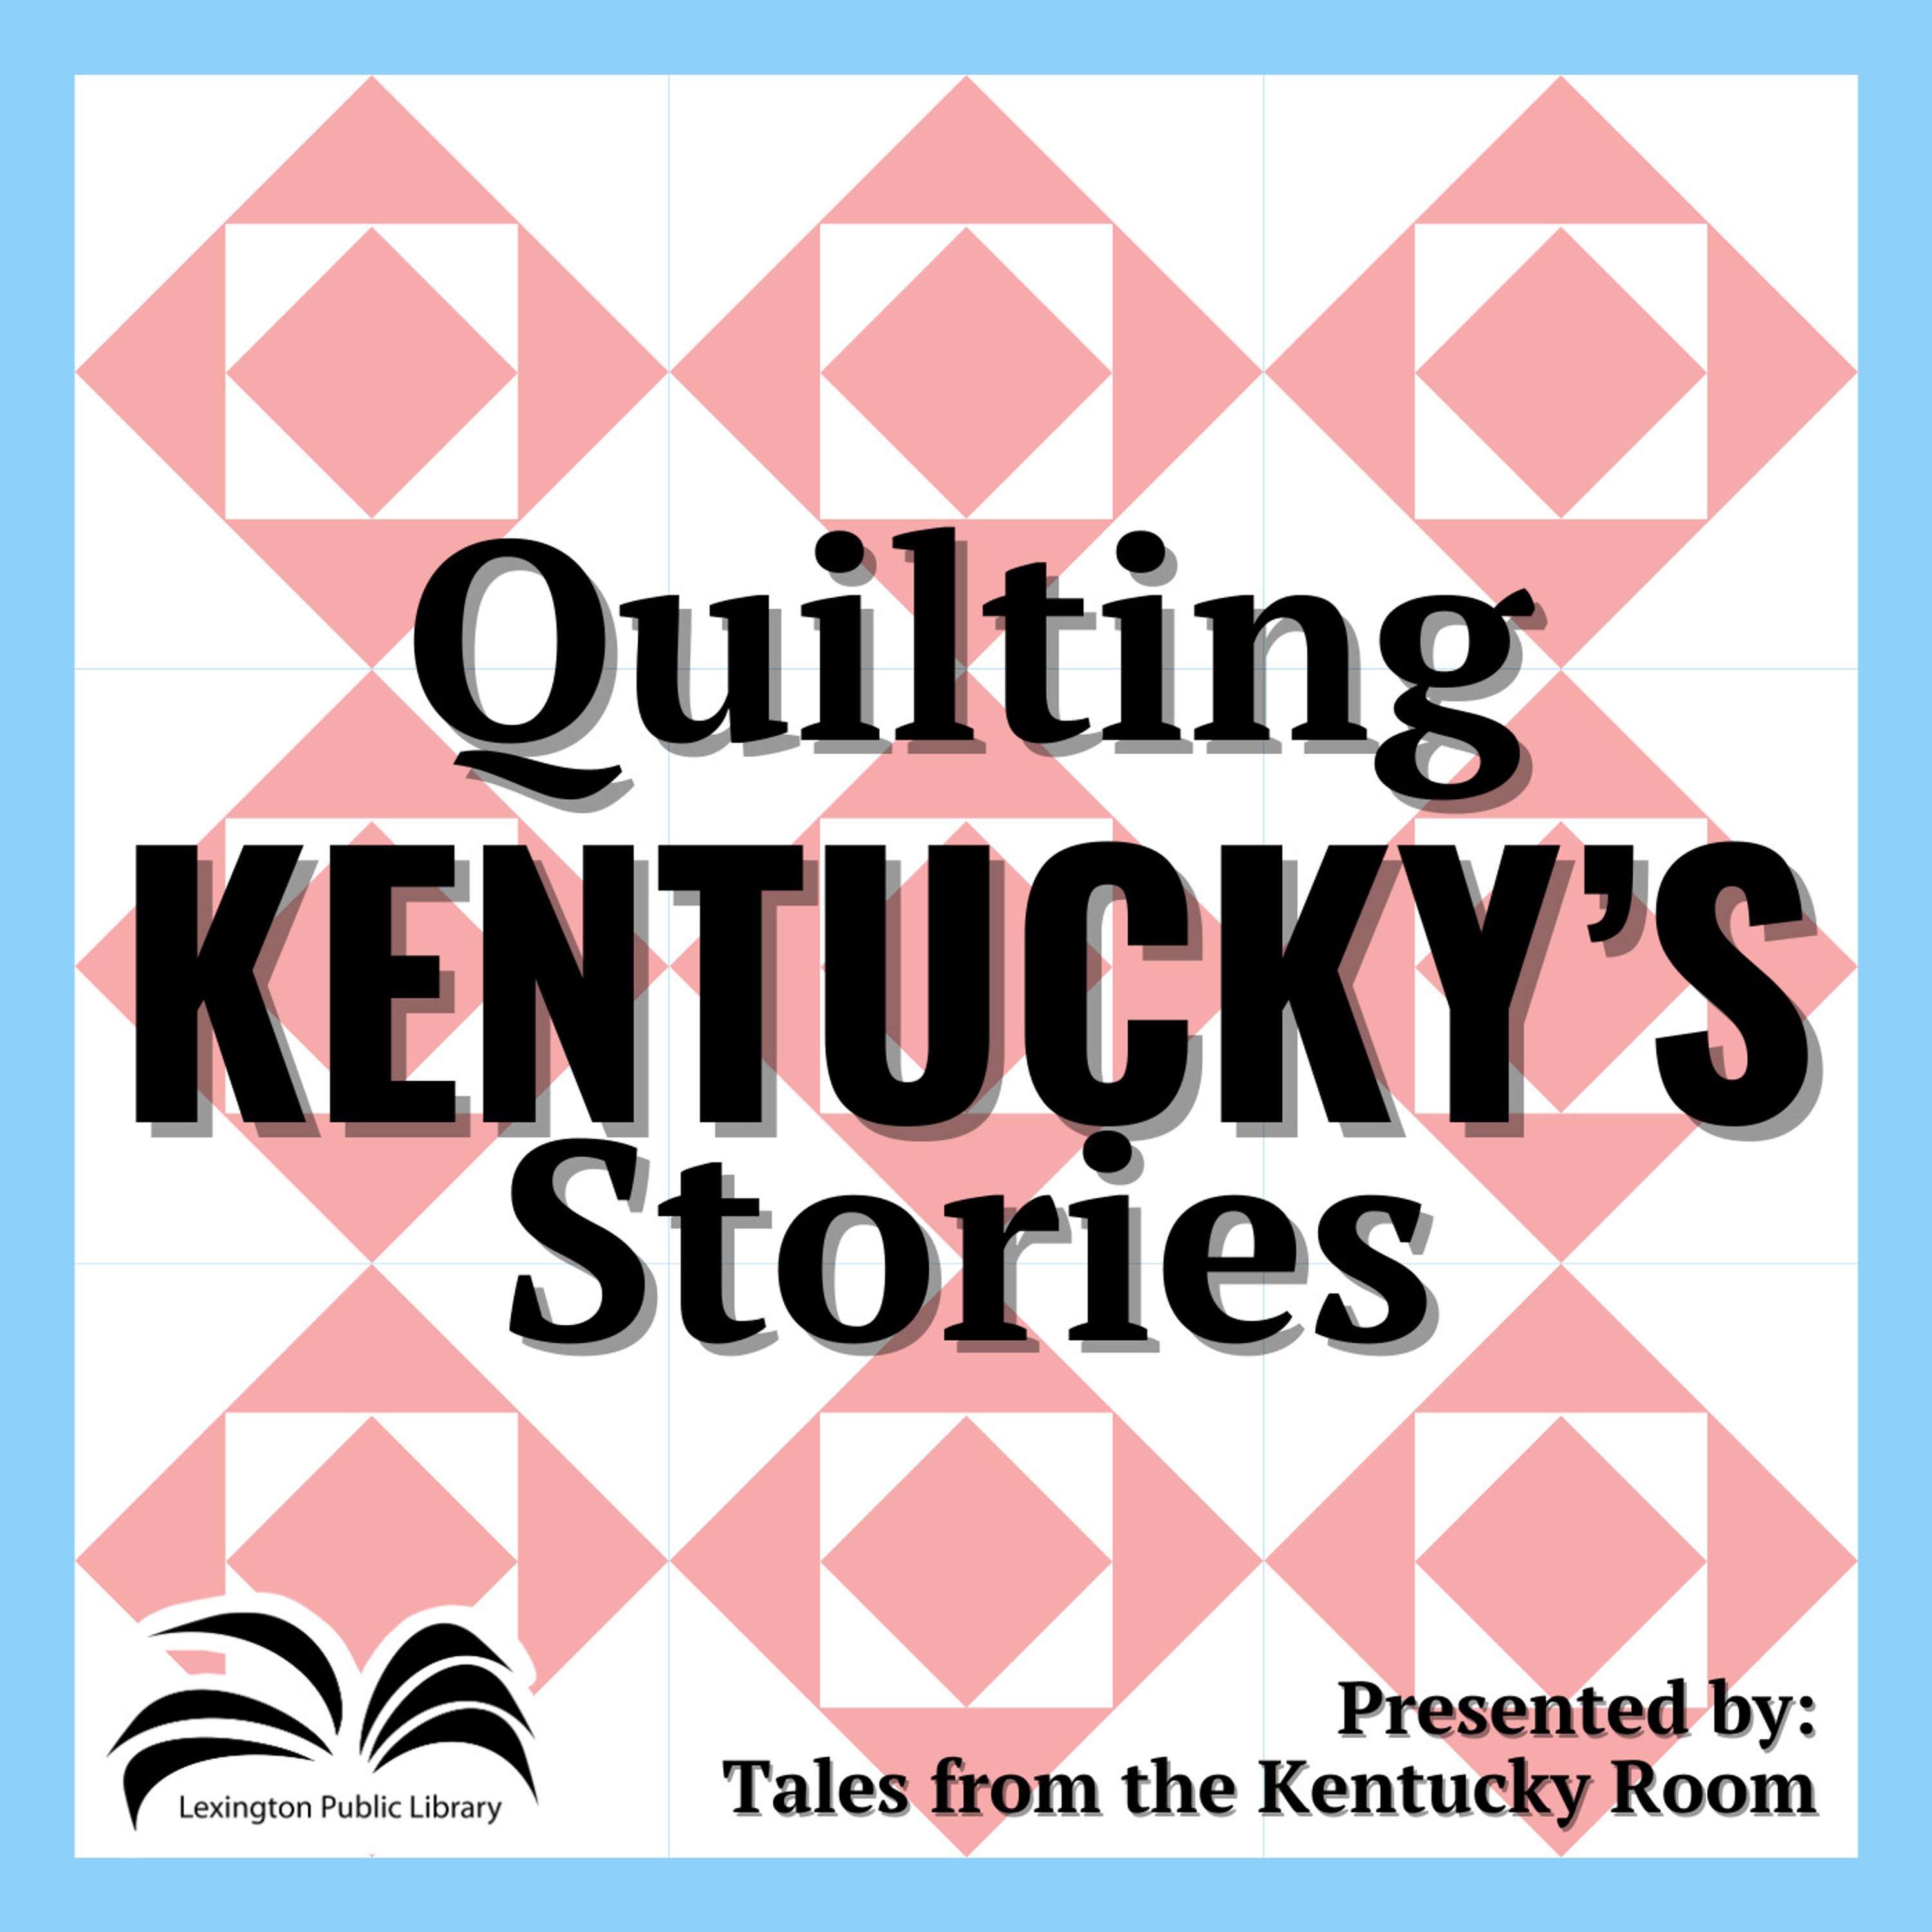 Coming Soon: Quilting Kentucky’s Stories